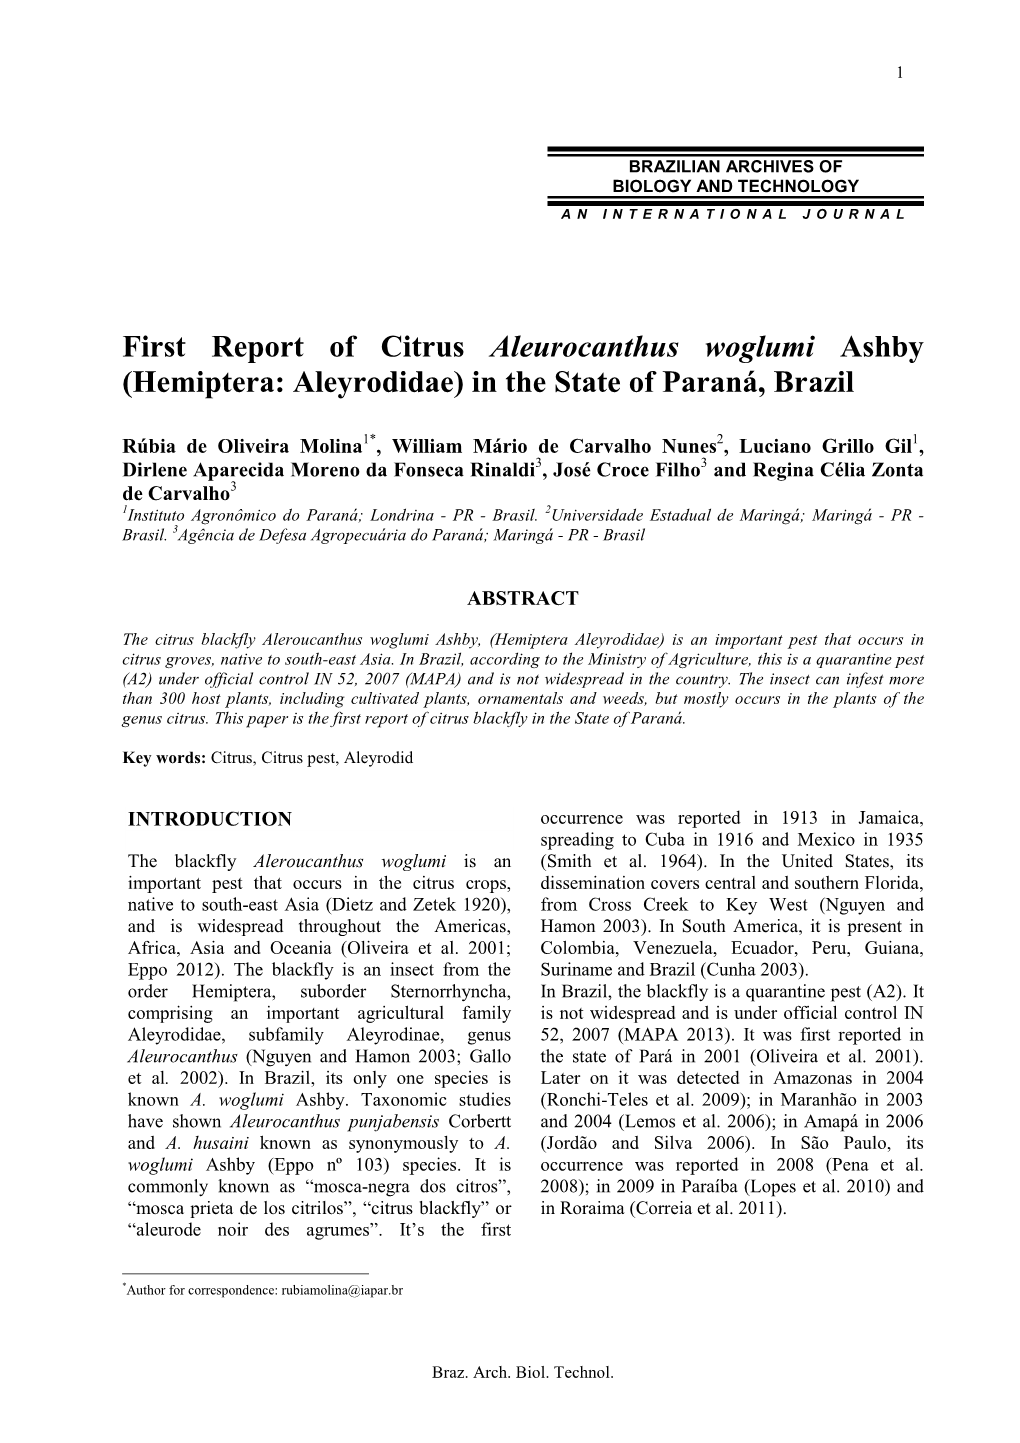 First Report of Citrus Aleurocanthus Woglumi Ashby (Hemiptera: Aleyrodidae) in the State of Paraná, Brazil